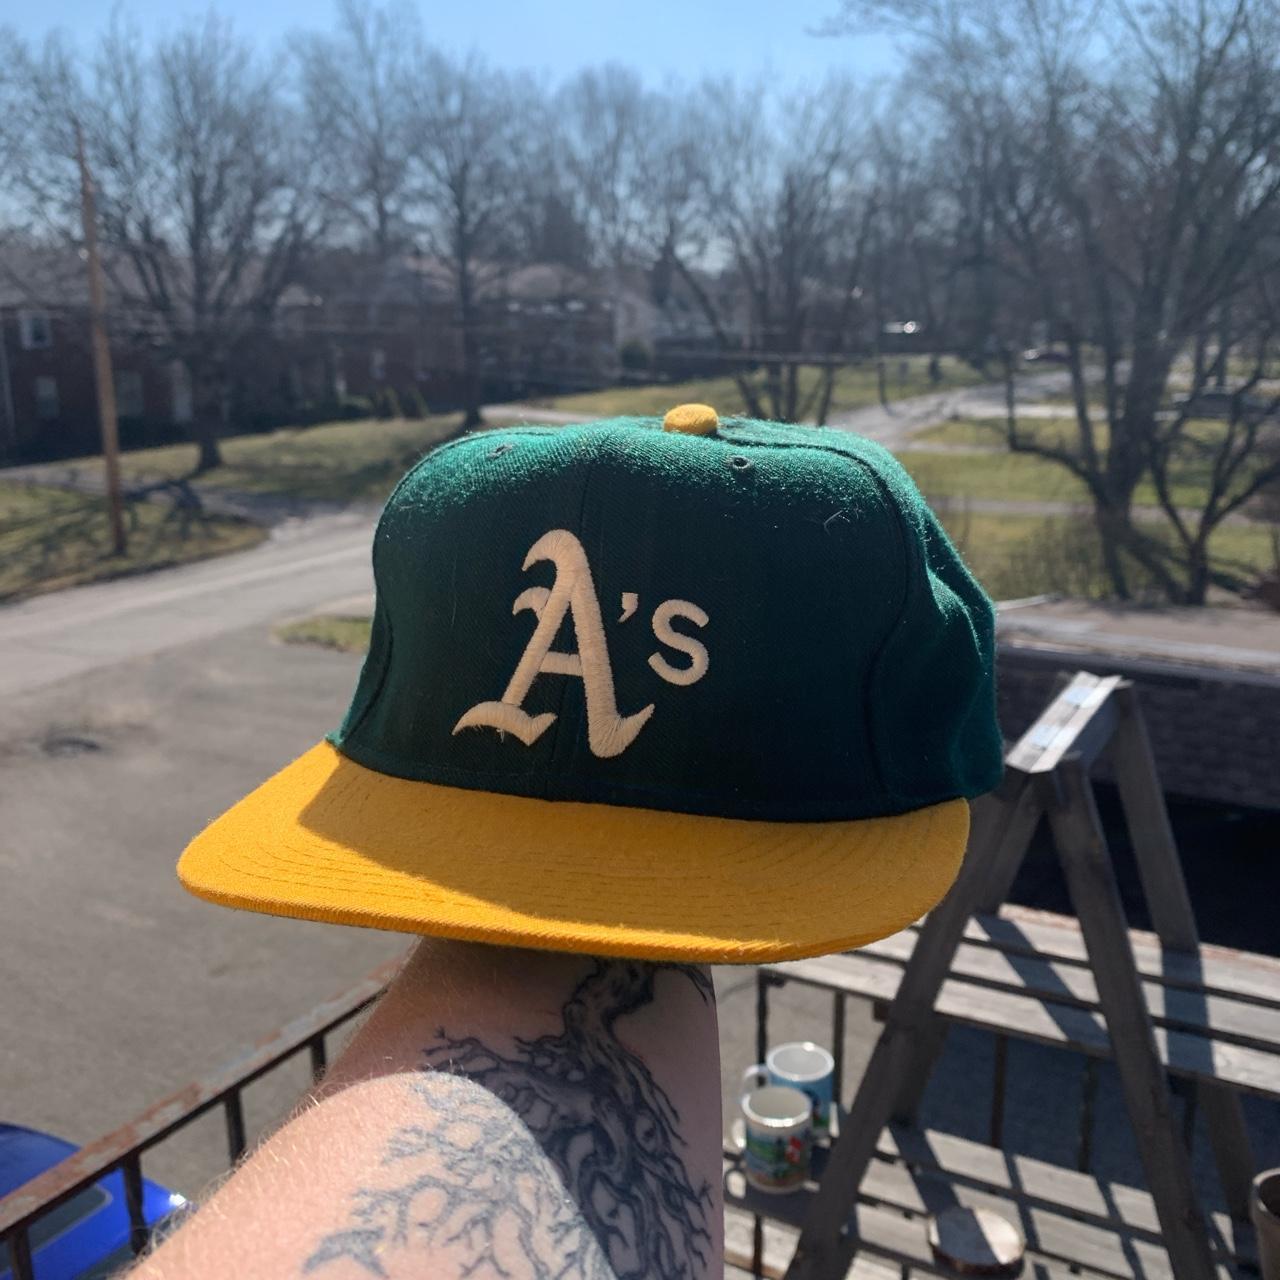 1980’s Oakland Athletics New Era Fitted hat, - 8/10